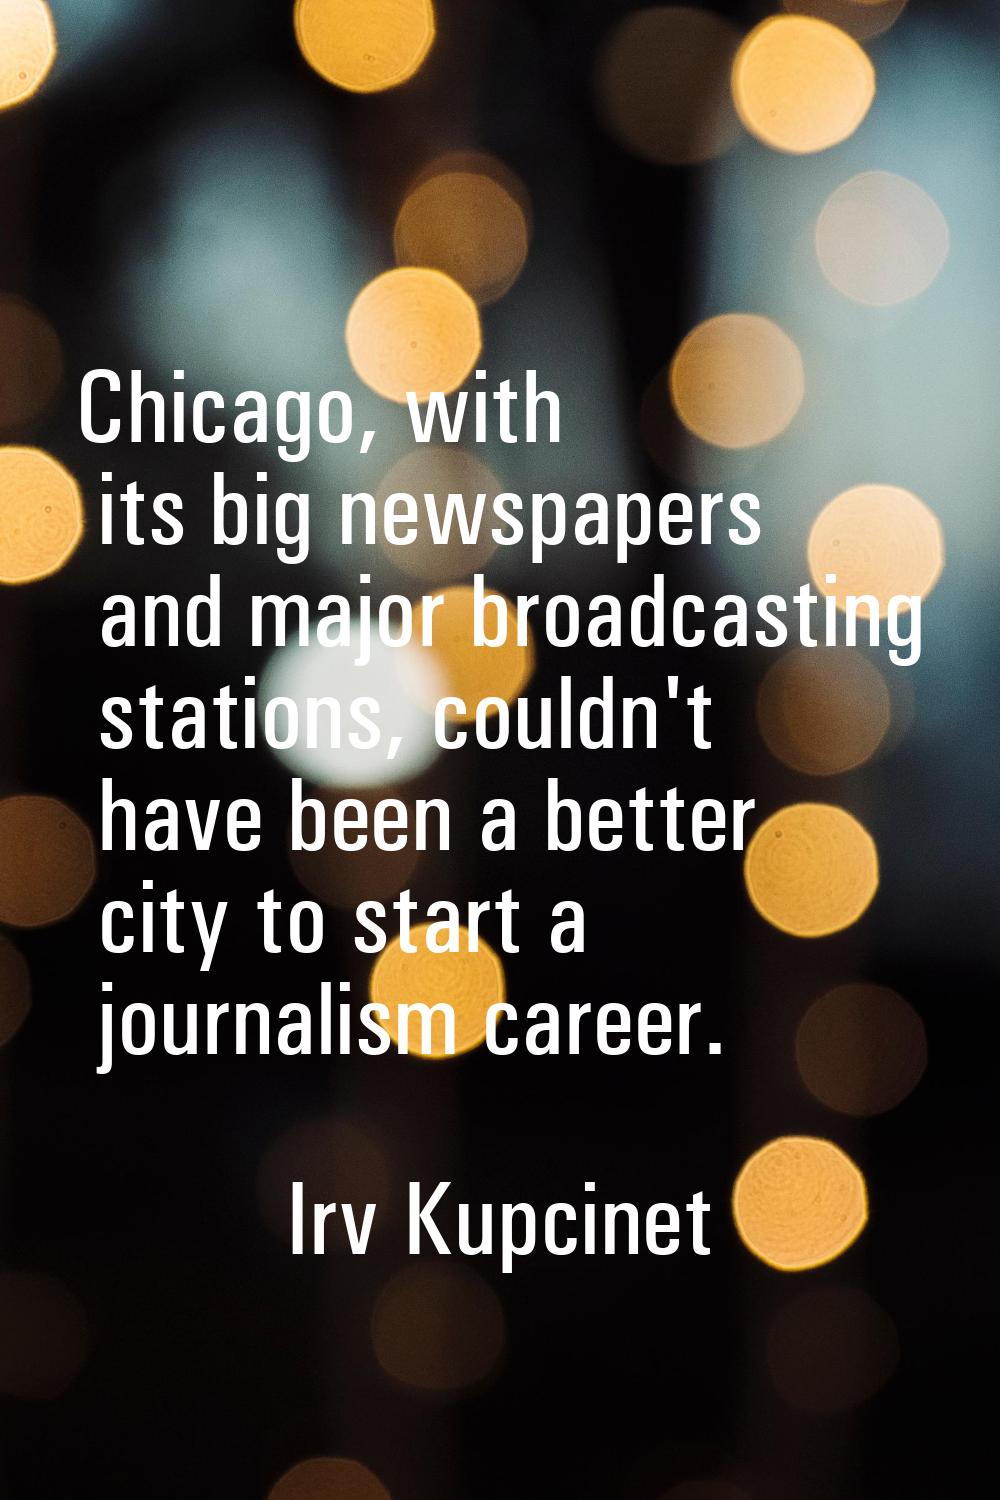 Chicago, with its big newspapers and major broadcasting stations, couldn't have been a better city 